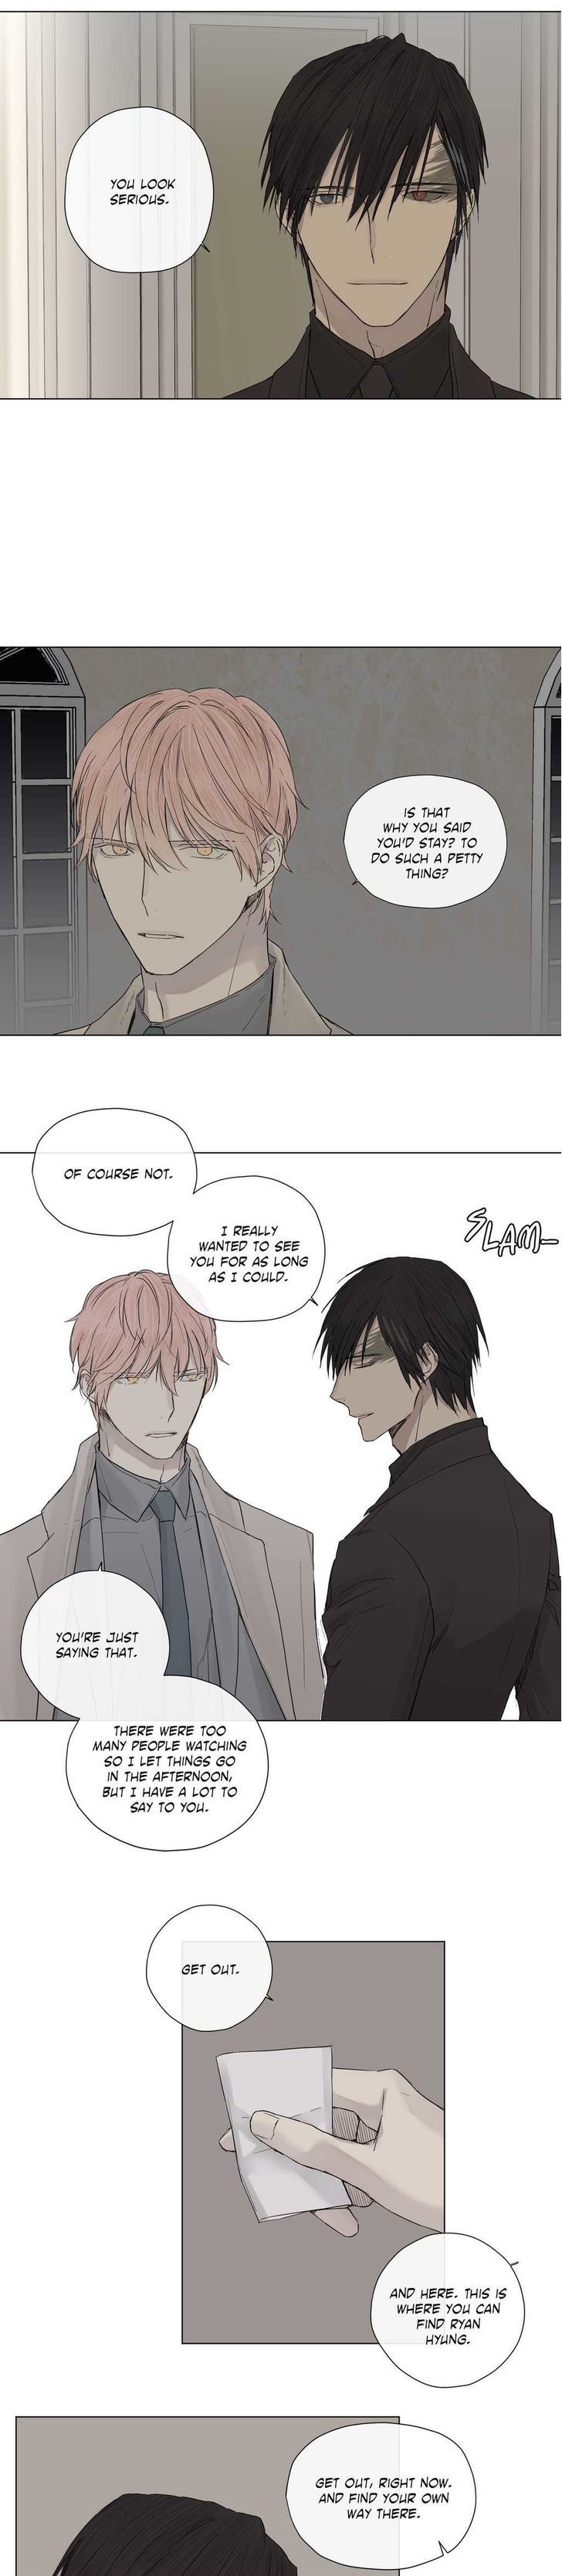 Royal Servant - Chapter 11 Page 4